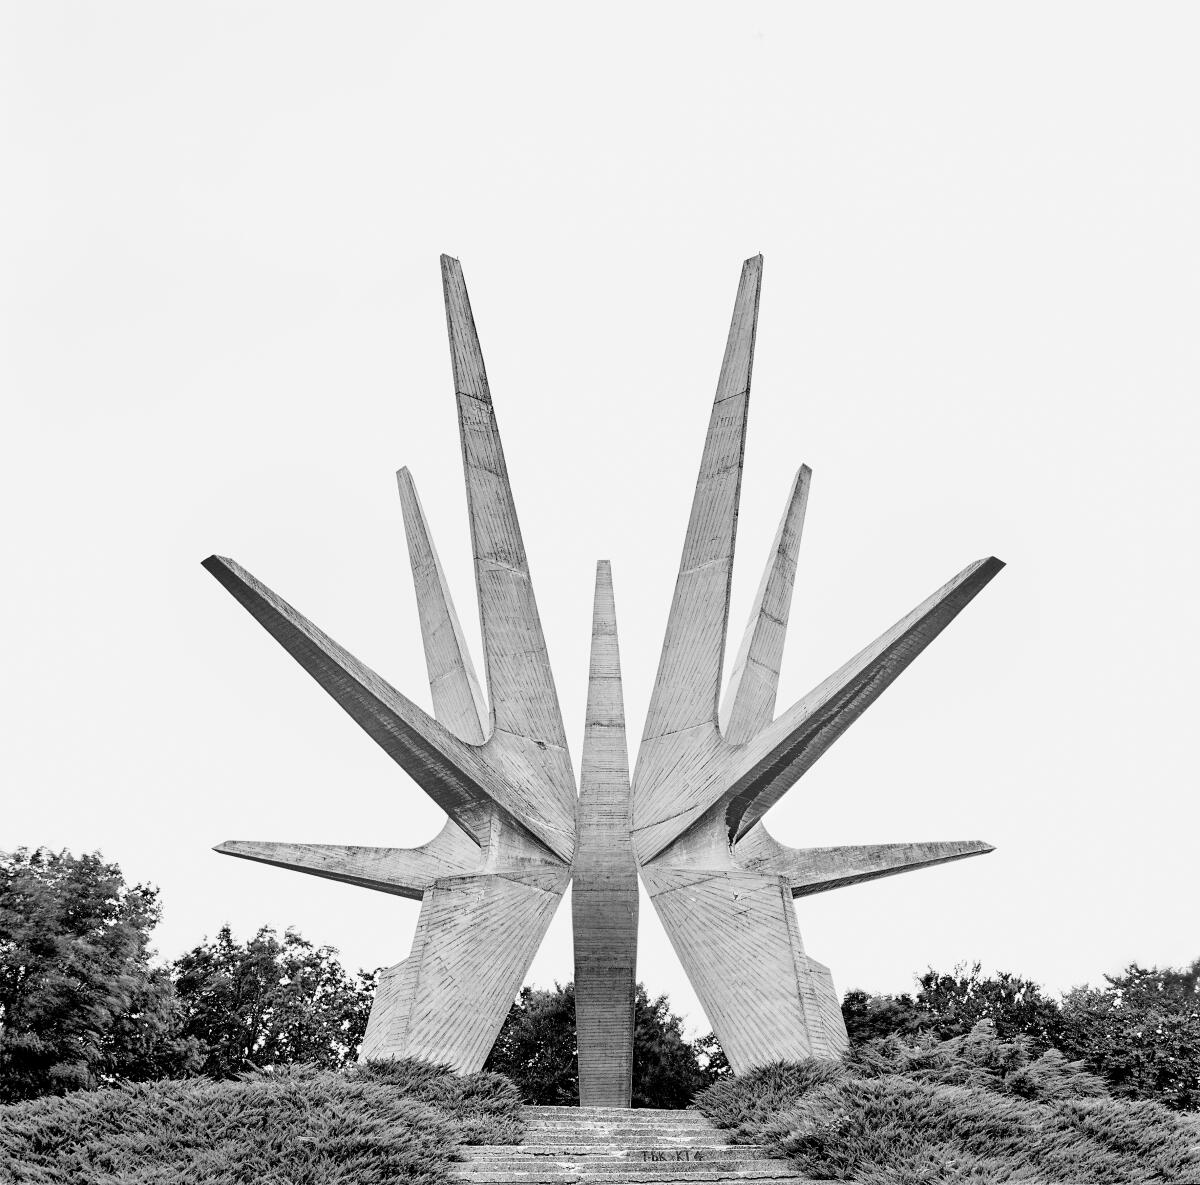 A structure with large spikes extending in several directions.